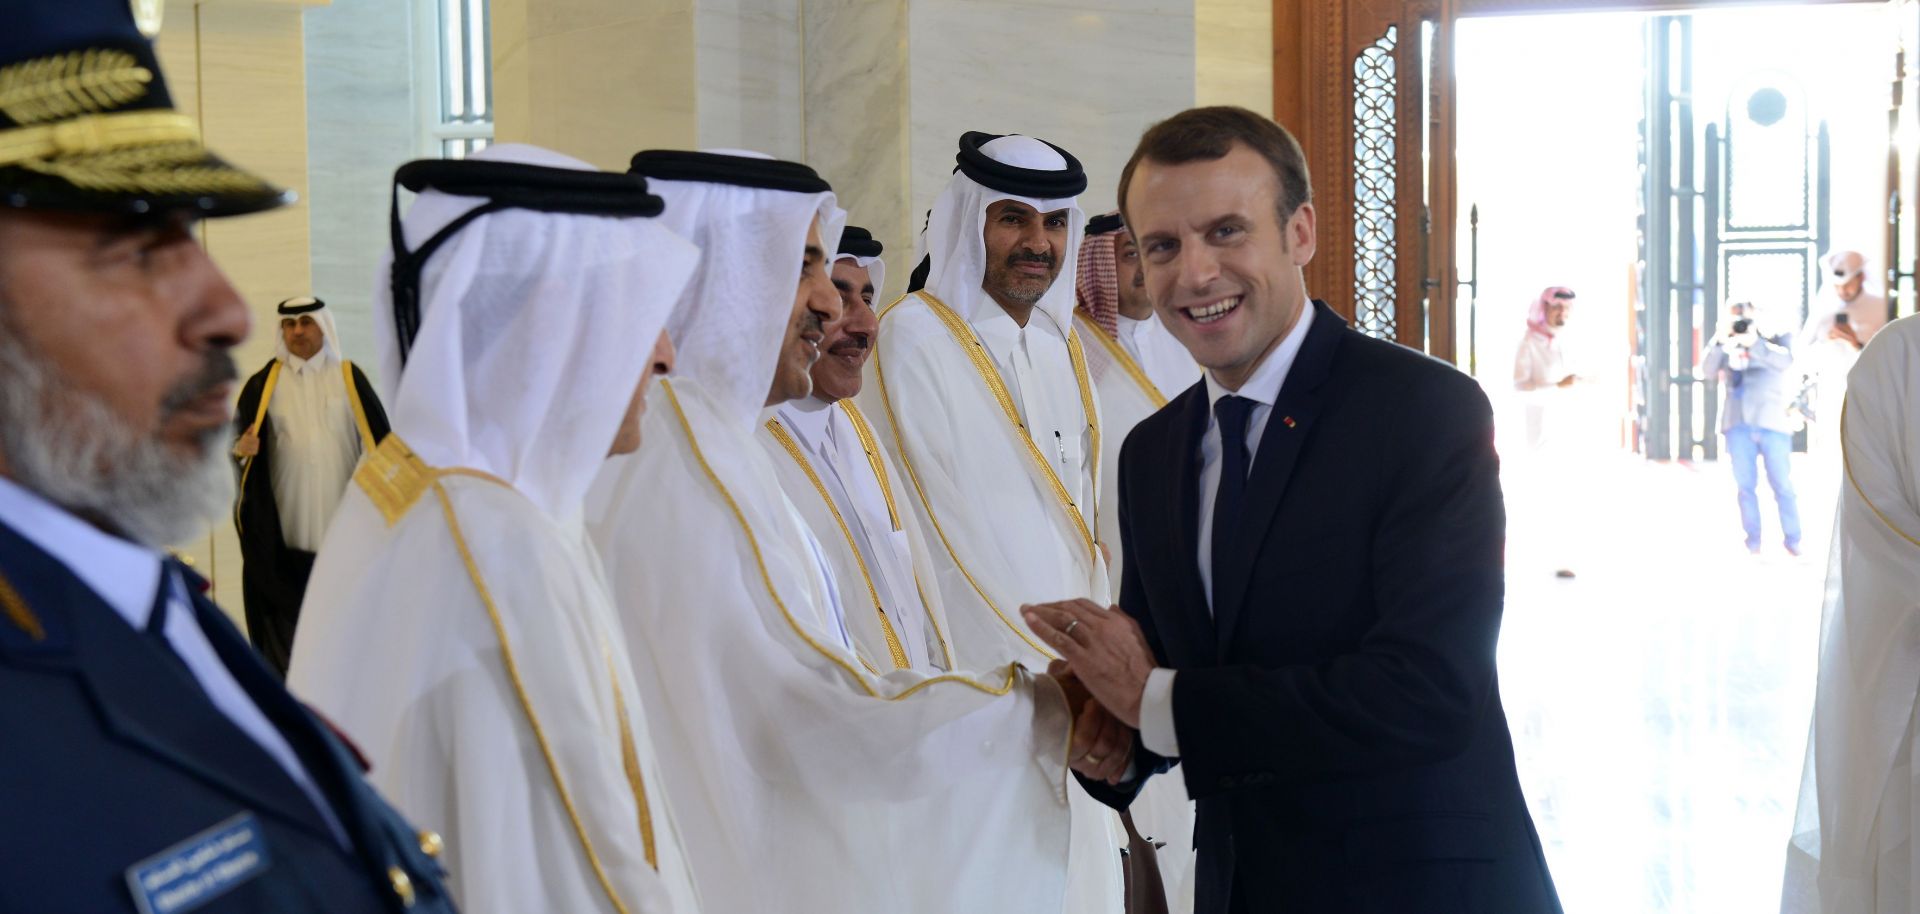 Qatari officials greet French President Emmanuel Macron (R) on his recent visit to Doha in December 2017.